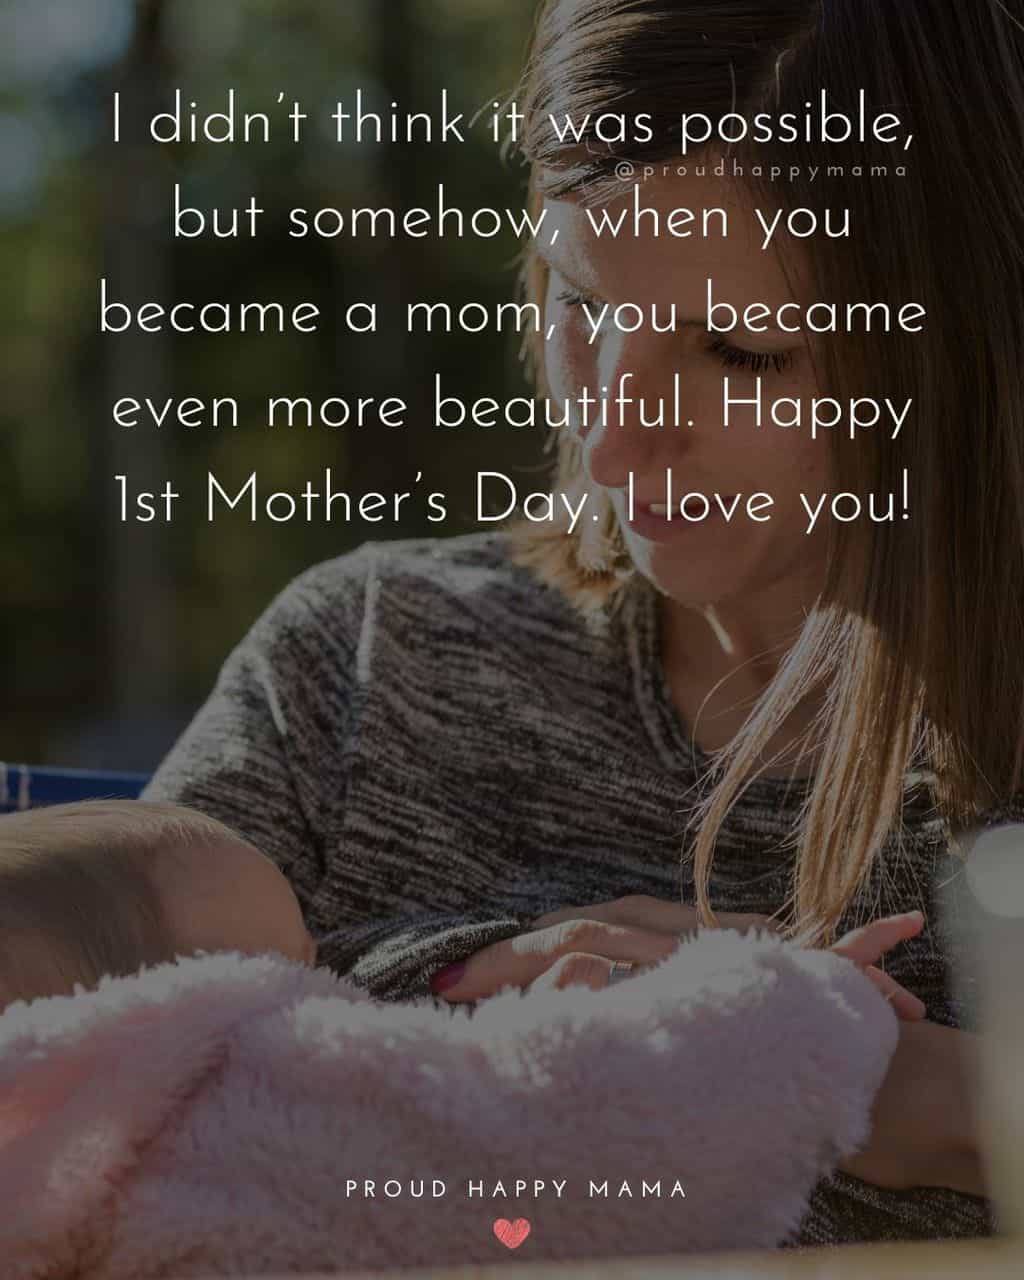 First Mothers Day Quotes - I didn’t think it was possible, but somehow, when you became a mom, you became even more beautiful. Happy 